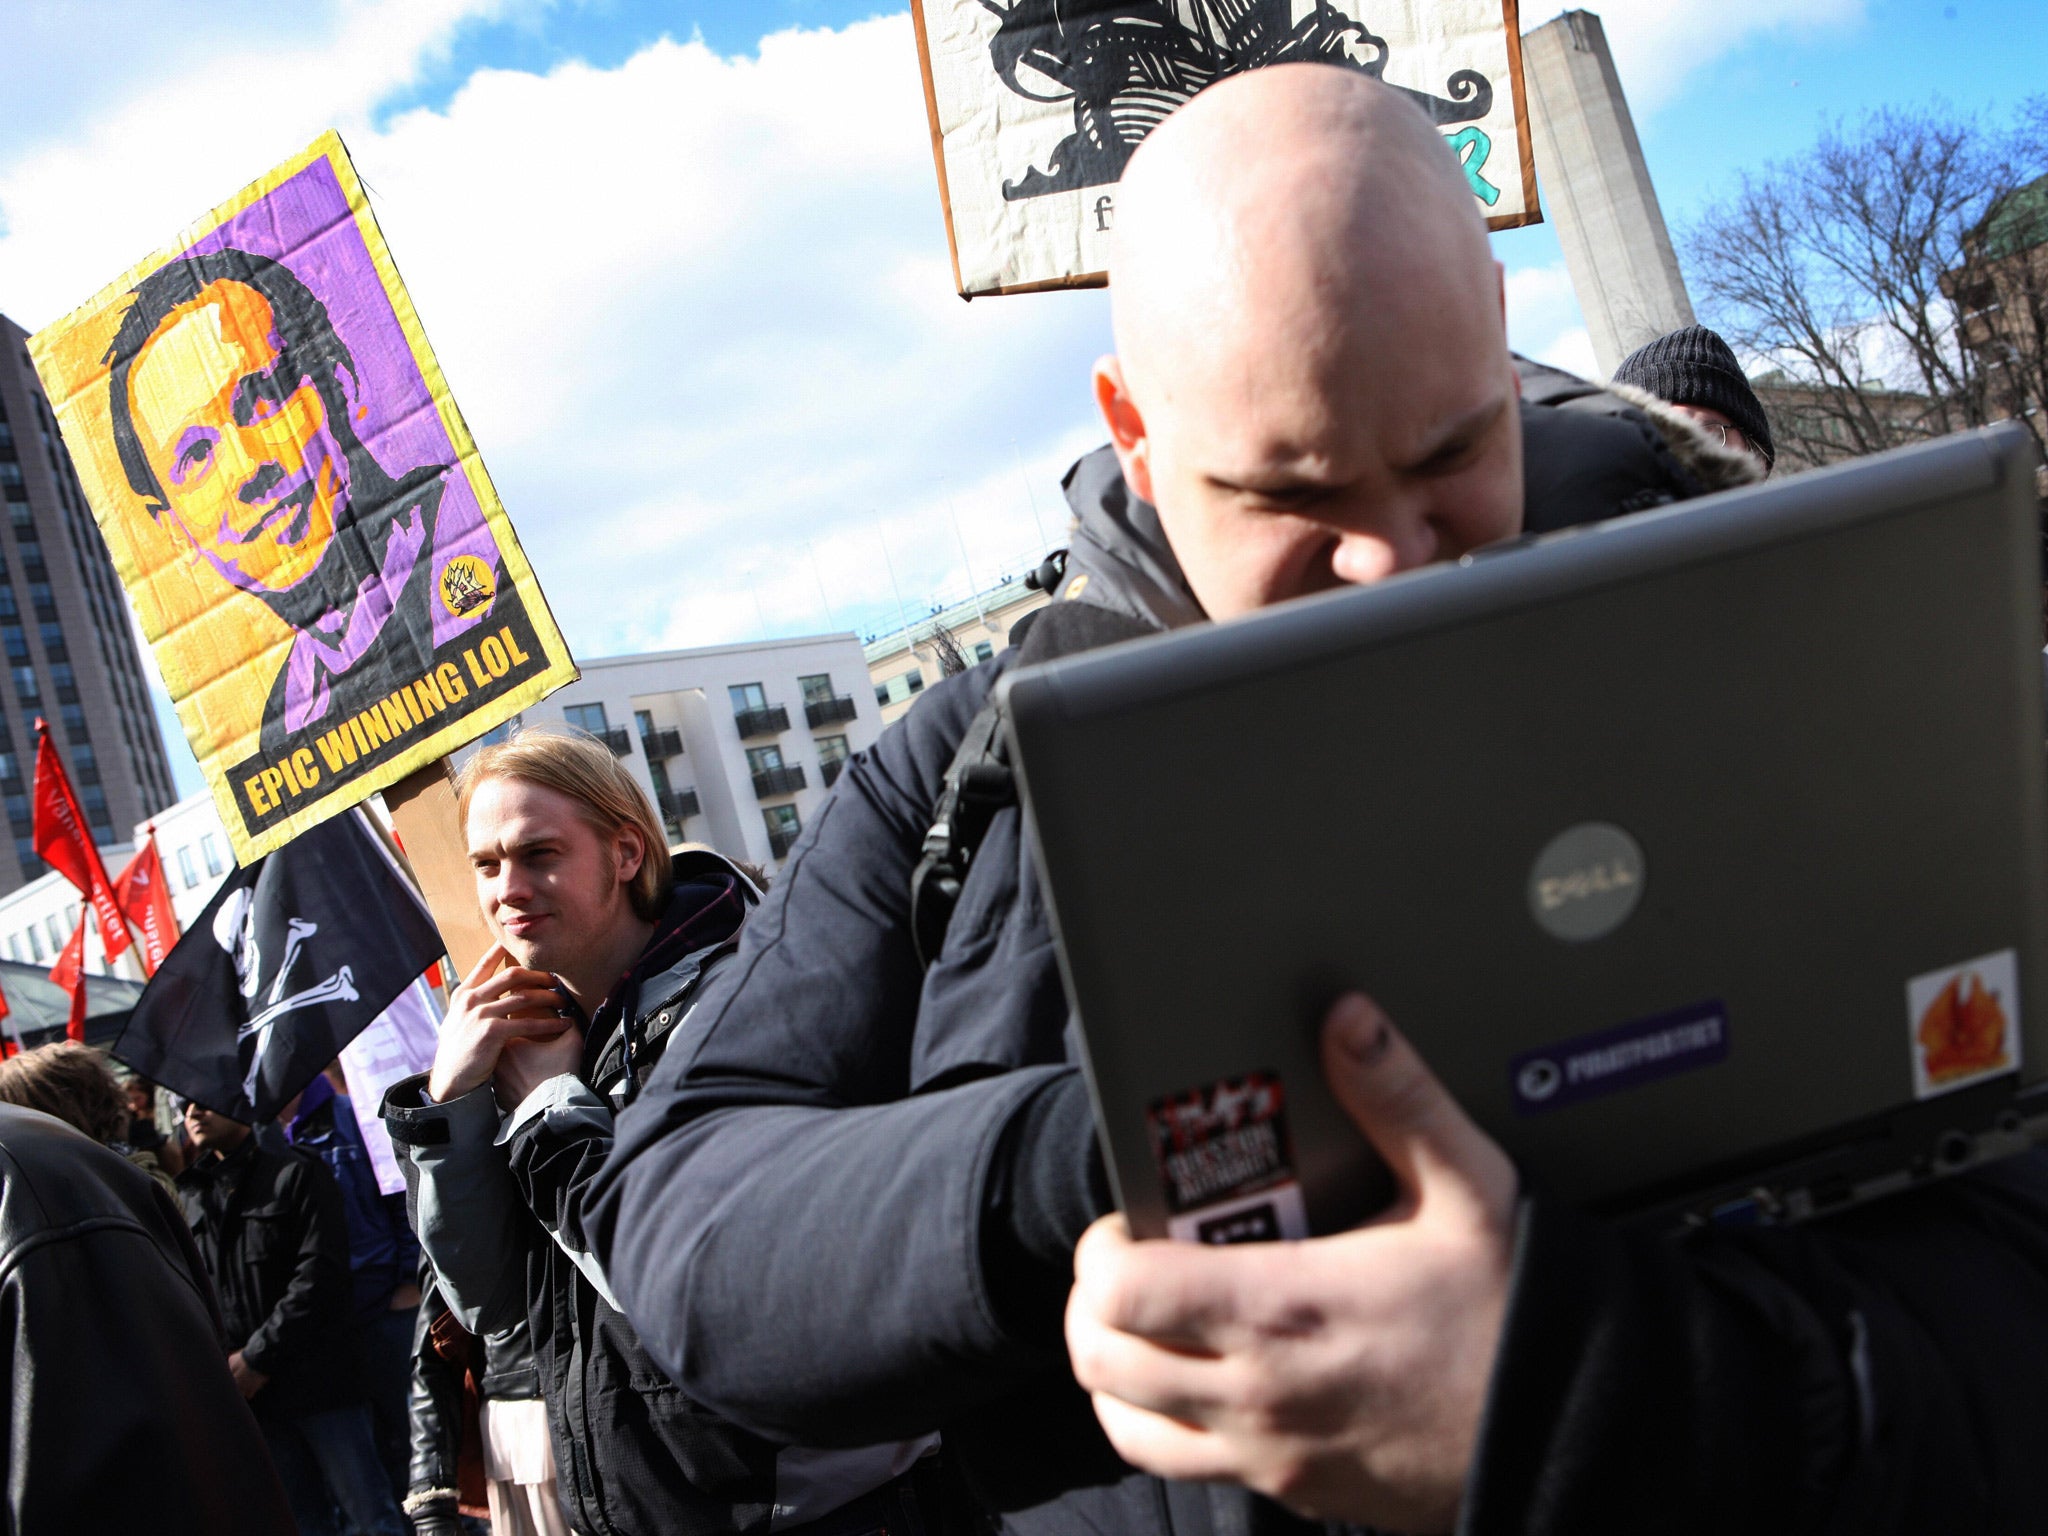 A photo taken on April 18, 2009 shows supporters of the Pirate Bay website, one of the world's top illegal file sharing websites, demonstrating against a new anti-piracy law in Stockholm